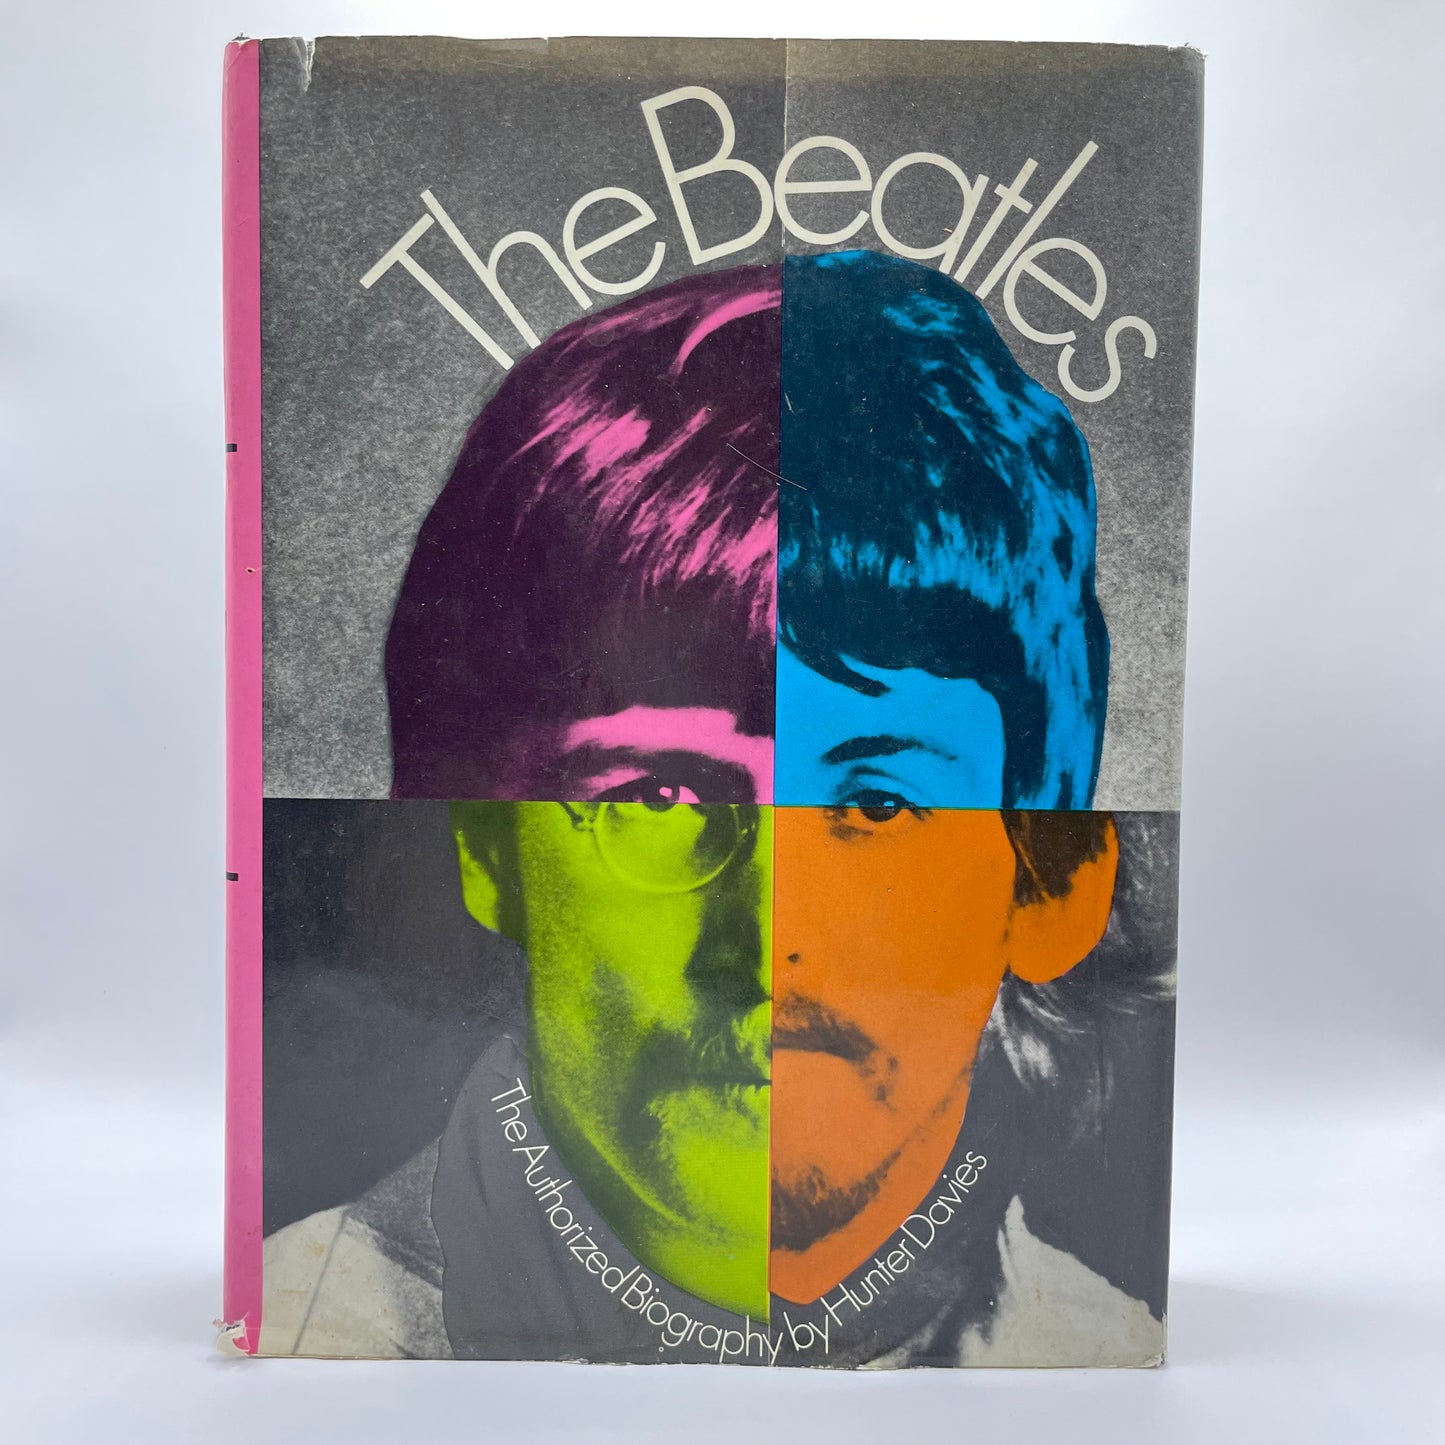 The Beatles Authorized Biography Book / Hunter Davies